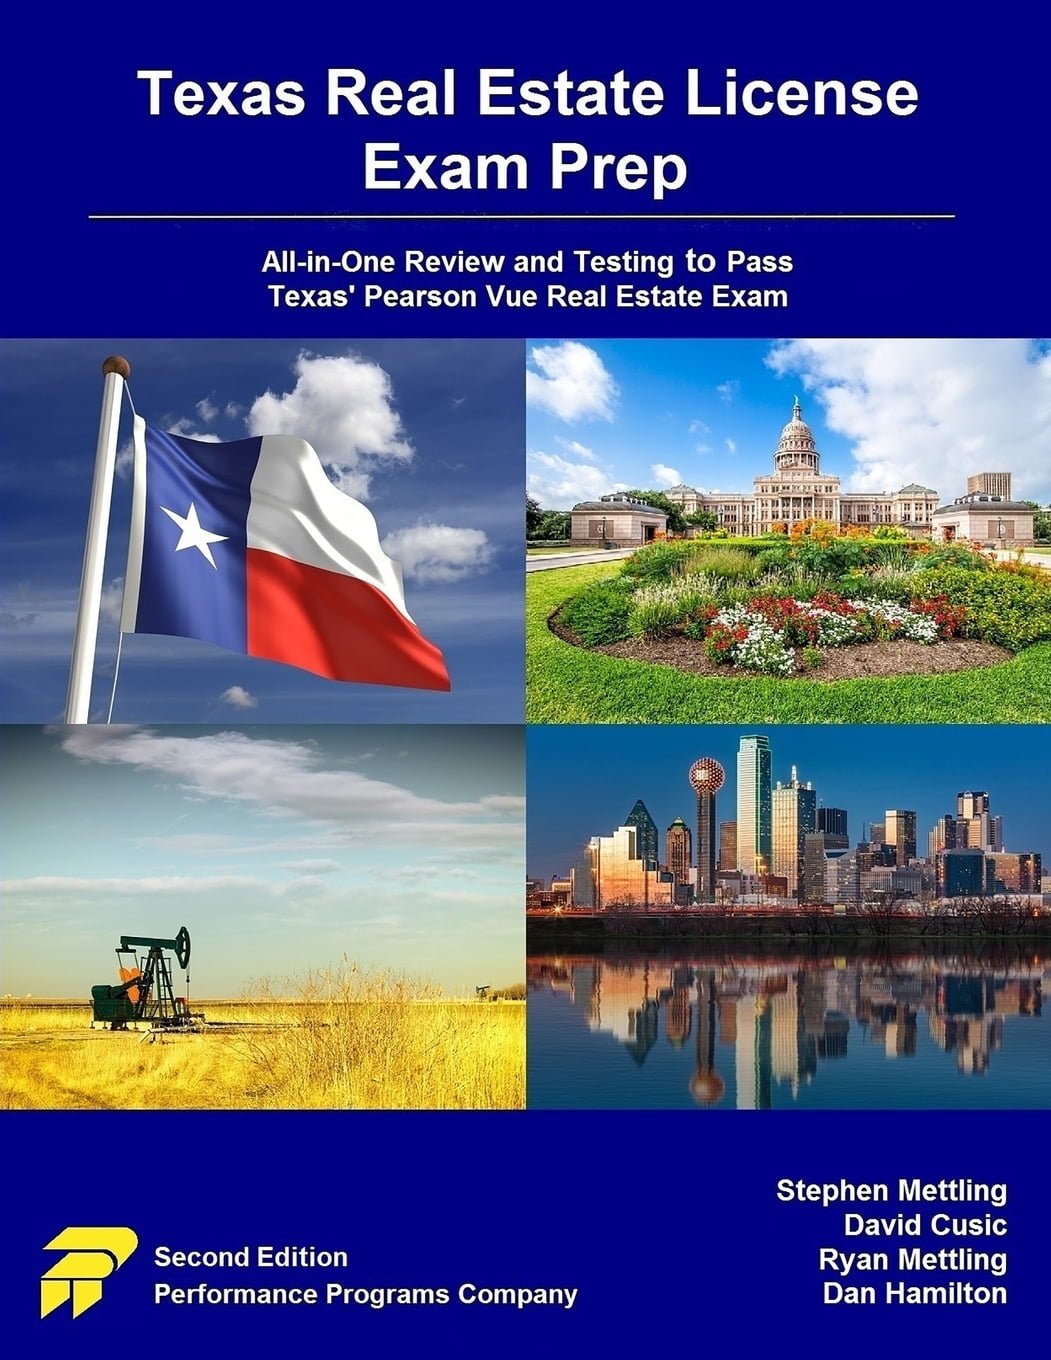 How long after passing your texas real estate test do you get your license?